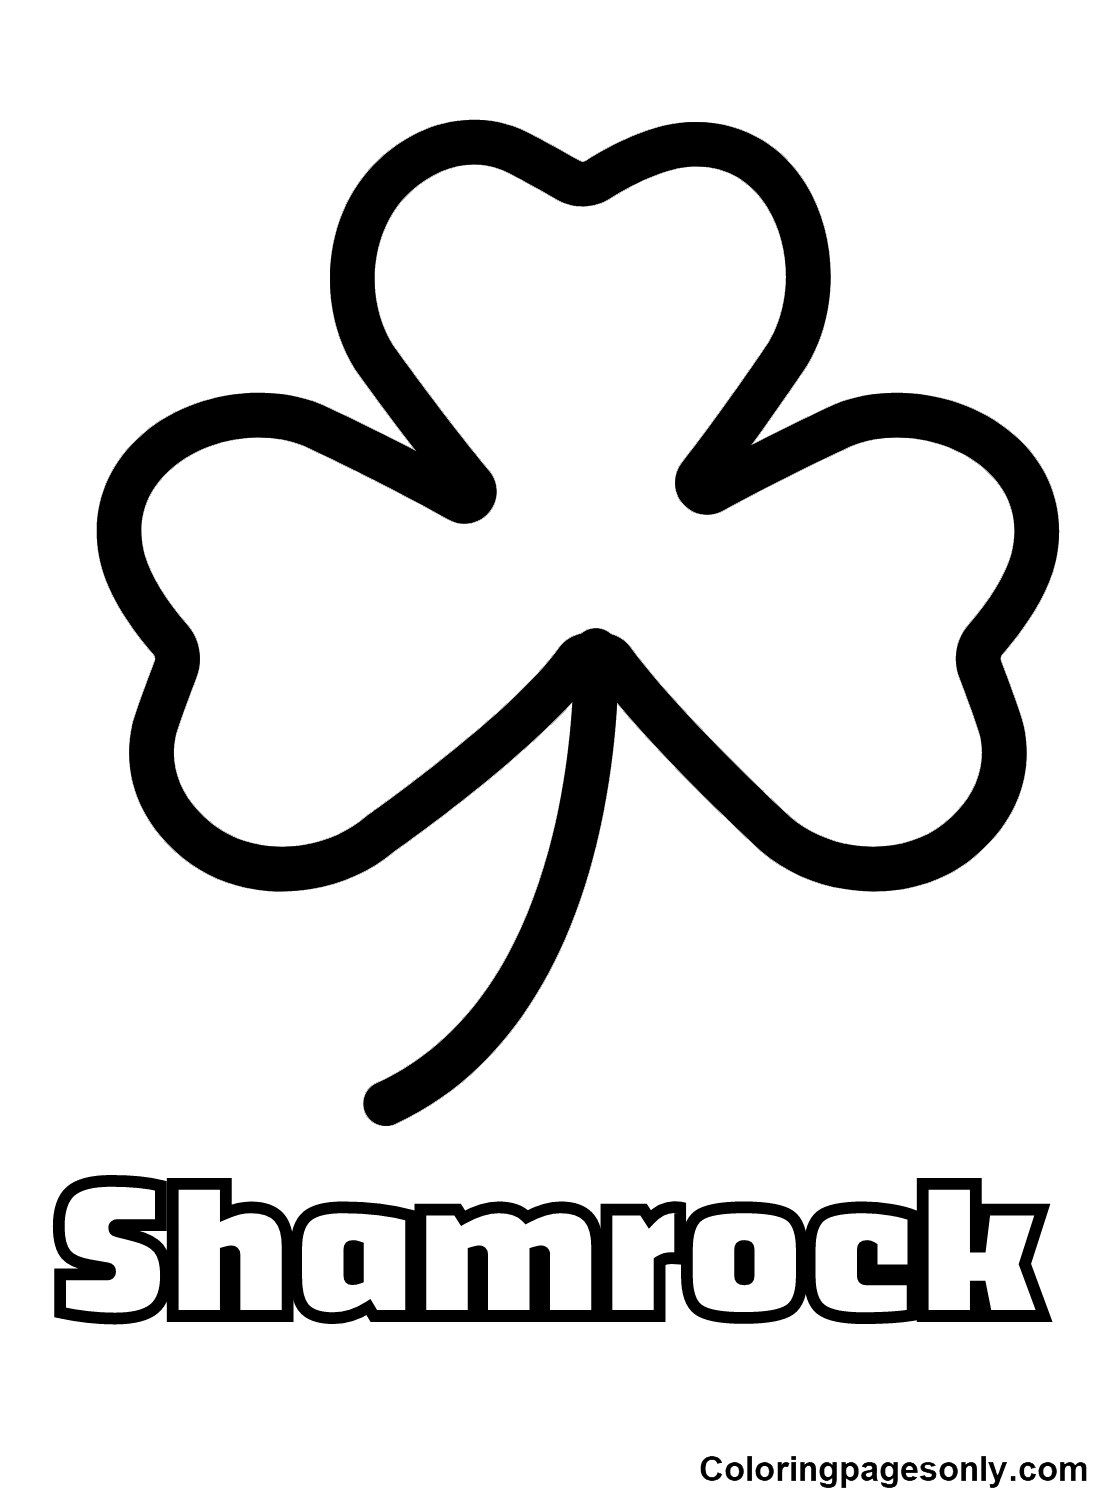 Shamrock coloring pages printable for free download